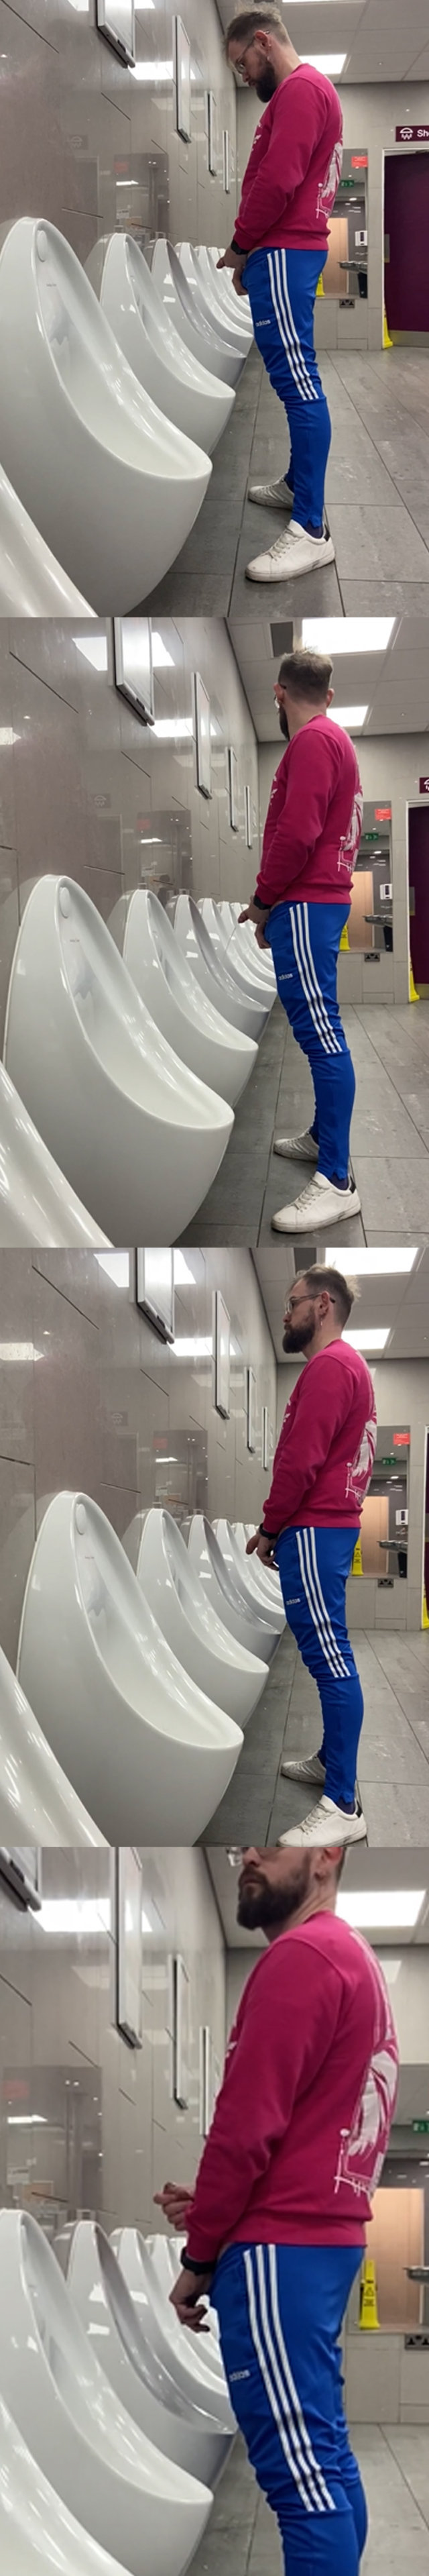 guy peeing and getting a boner at urinals